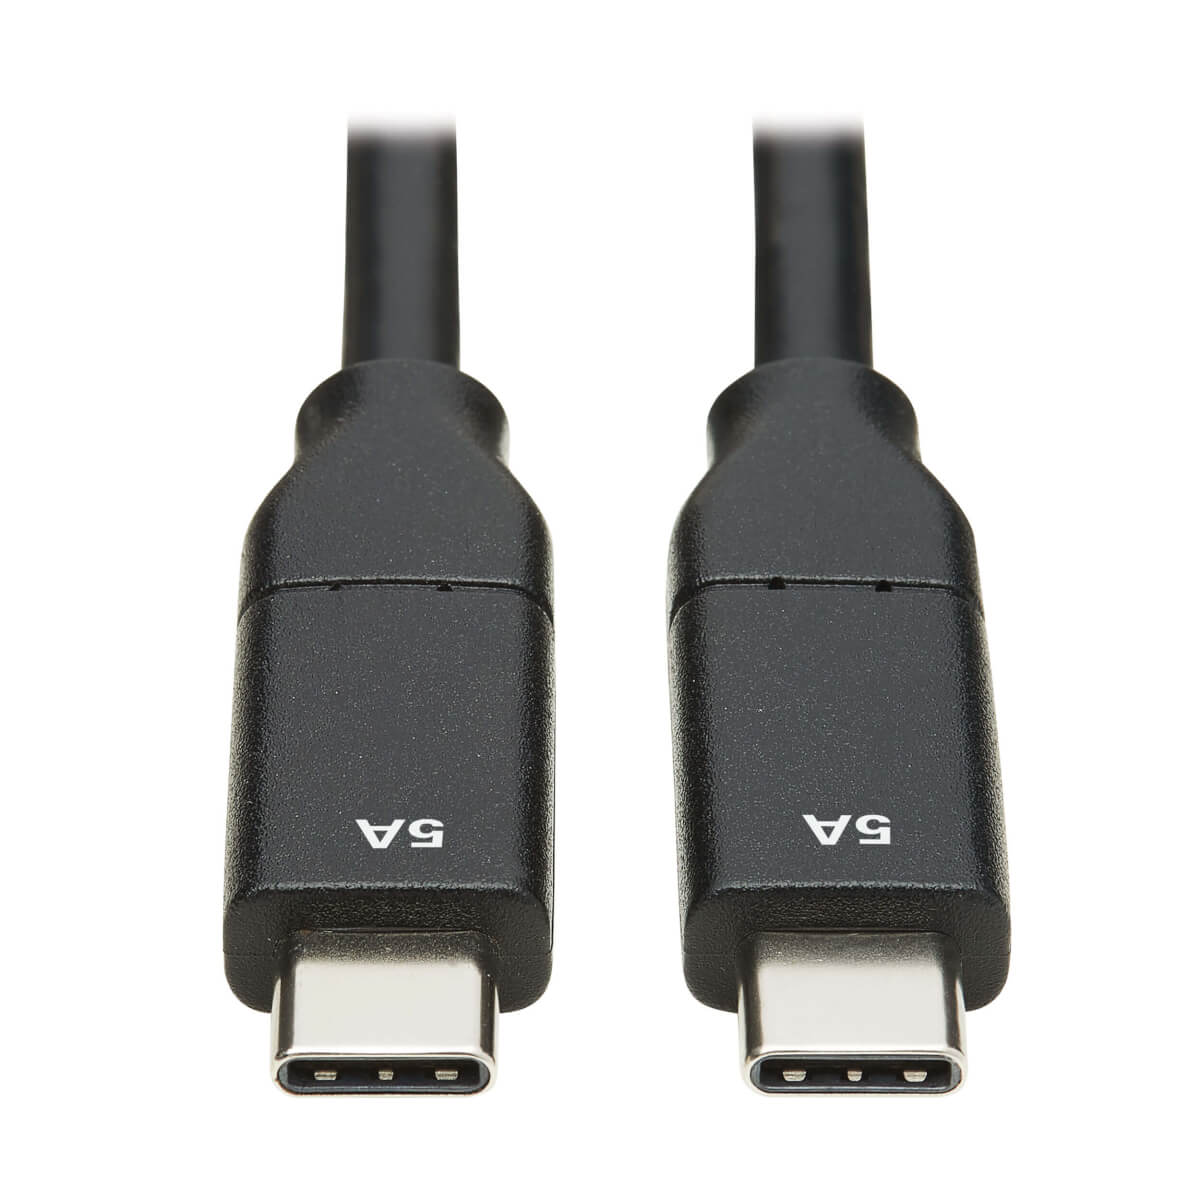 Tripp Lite USB Type C to USB C Cable USB 2.0 5A Rating USB-IF Cert M/M 2M, Black - image 2 of 5